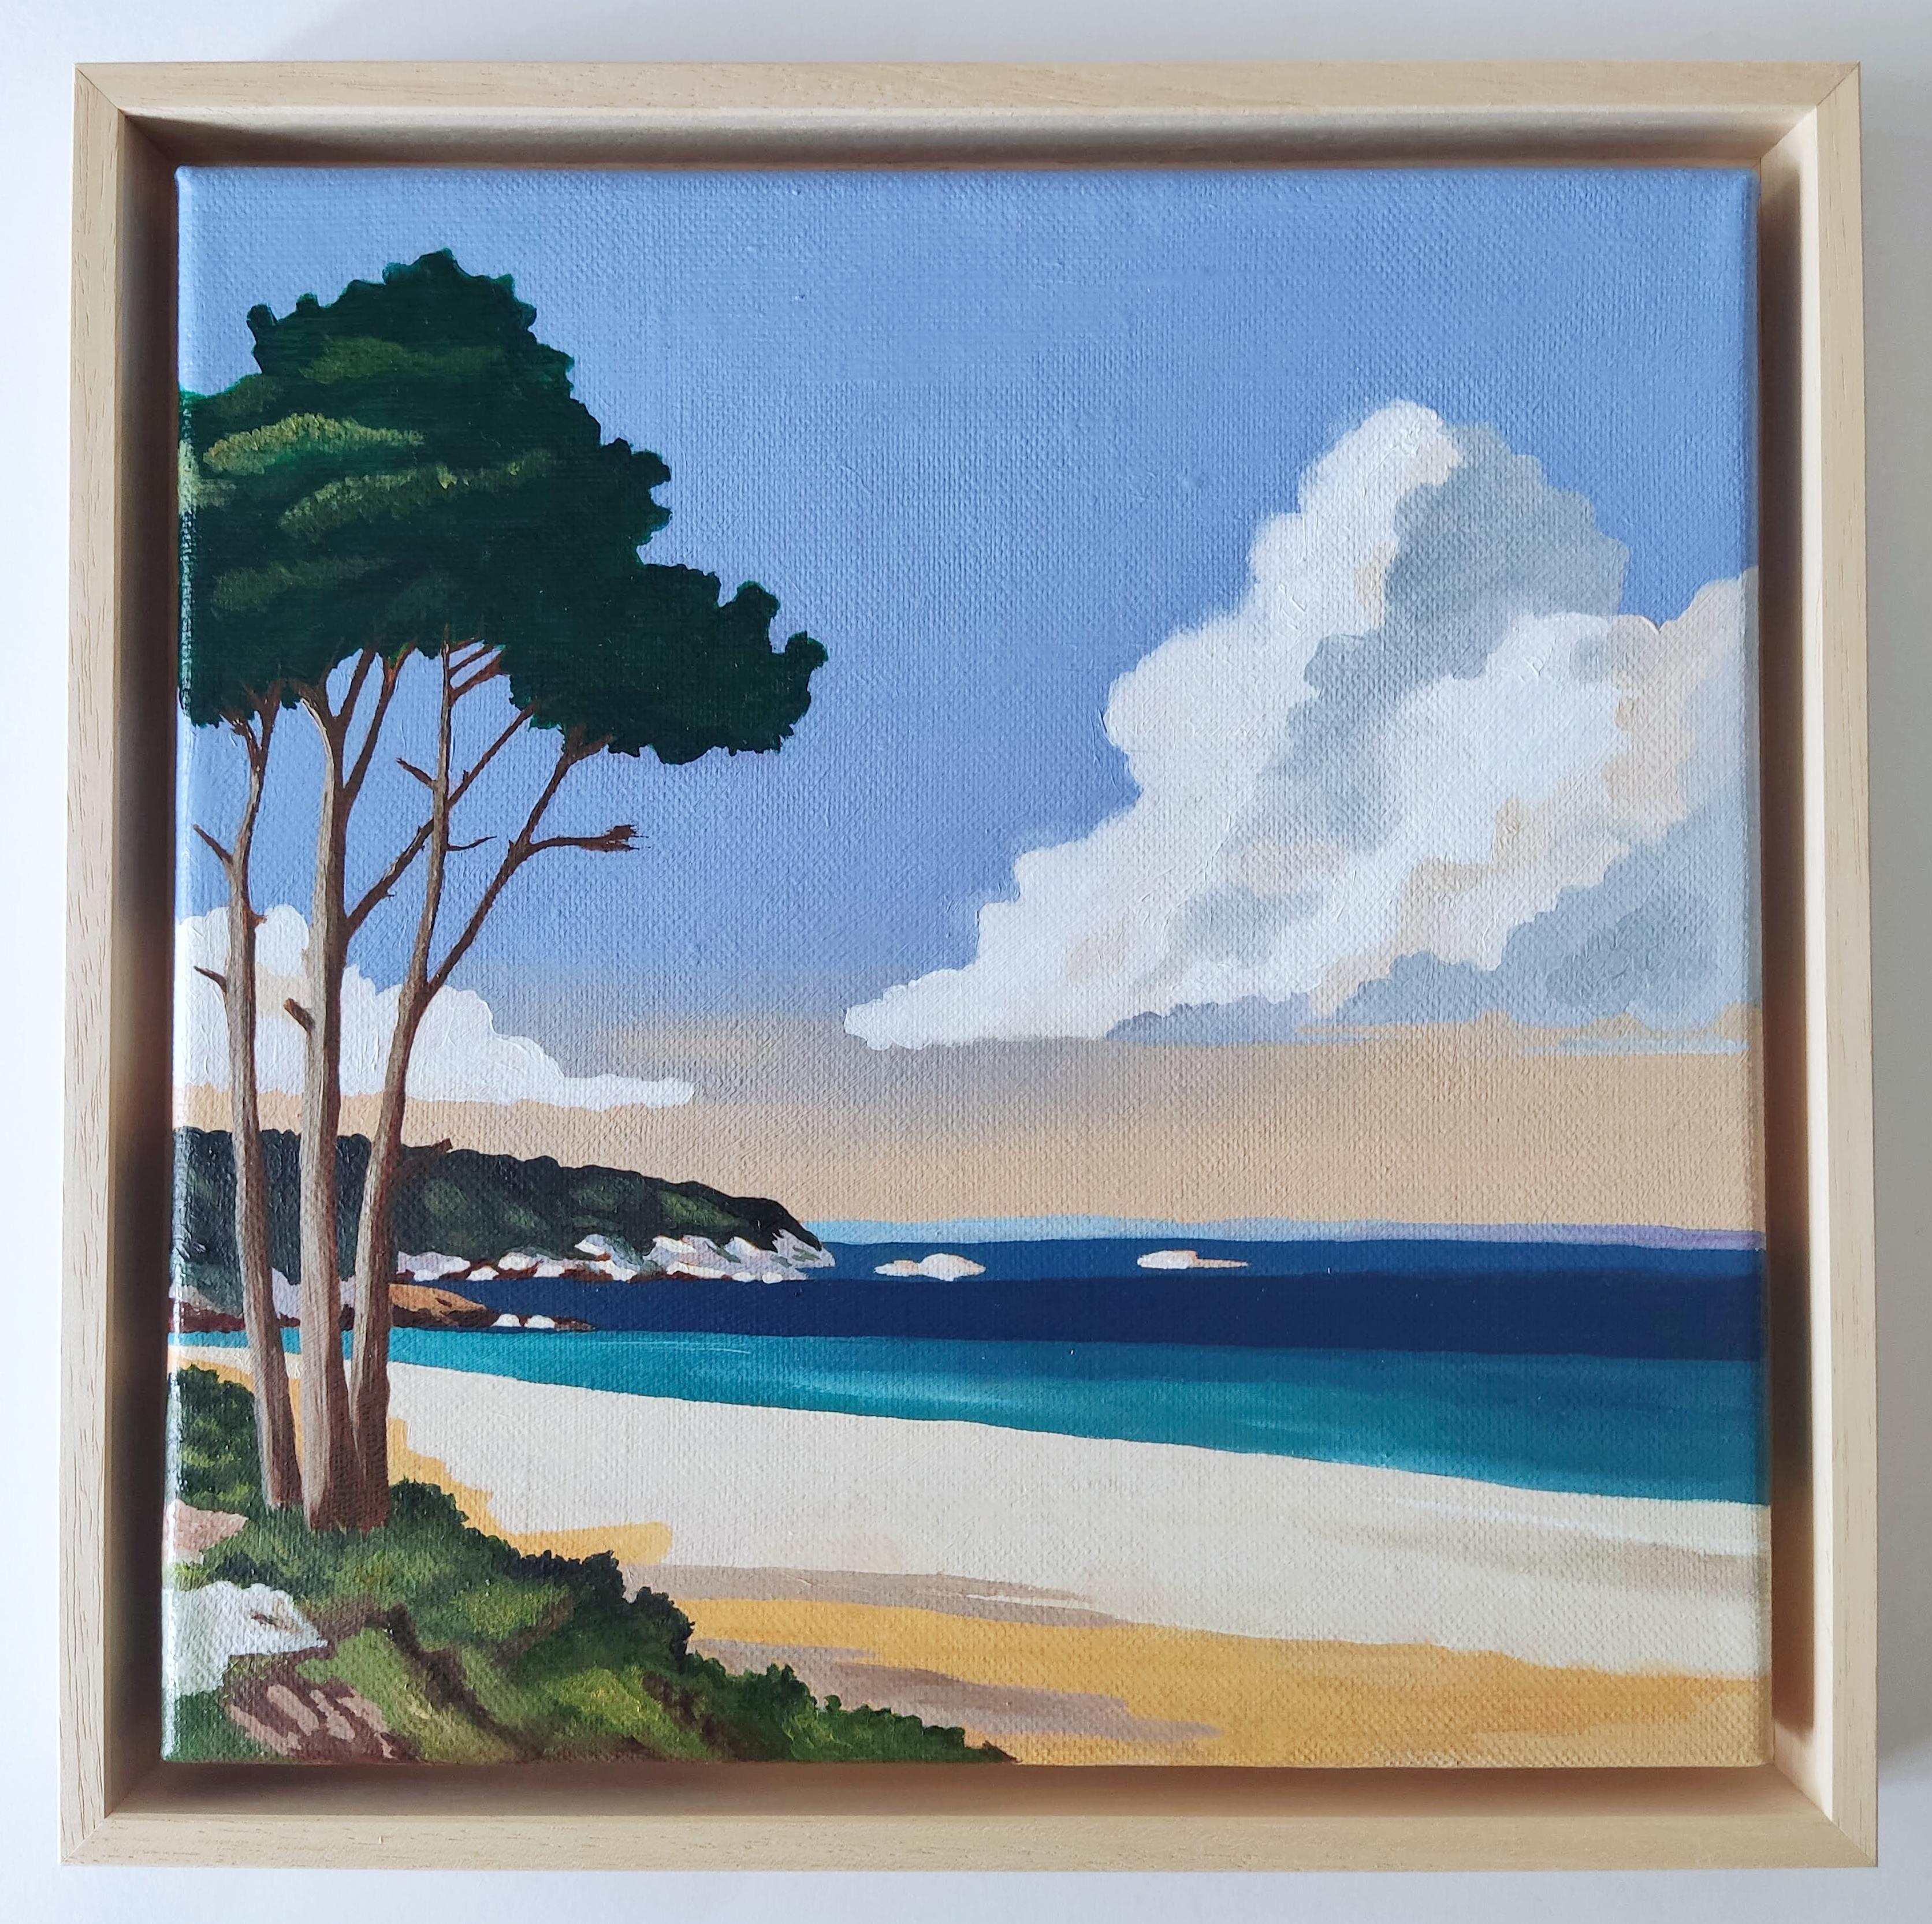 Work :  Original Oil Painting, Handmade artwork, Unique Work. Framed in Solid wood frame with light finish. Ready to Hang.
Medium : Oil painting on Linen Canvas.
Artist : Gabriel Riesnert
Subject : Bord de mer (Title)
Signature : The work is signed,